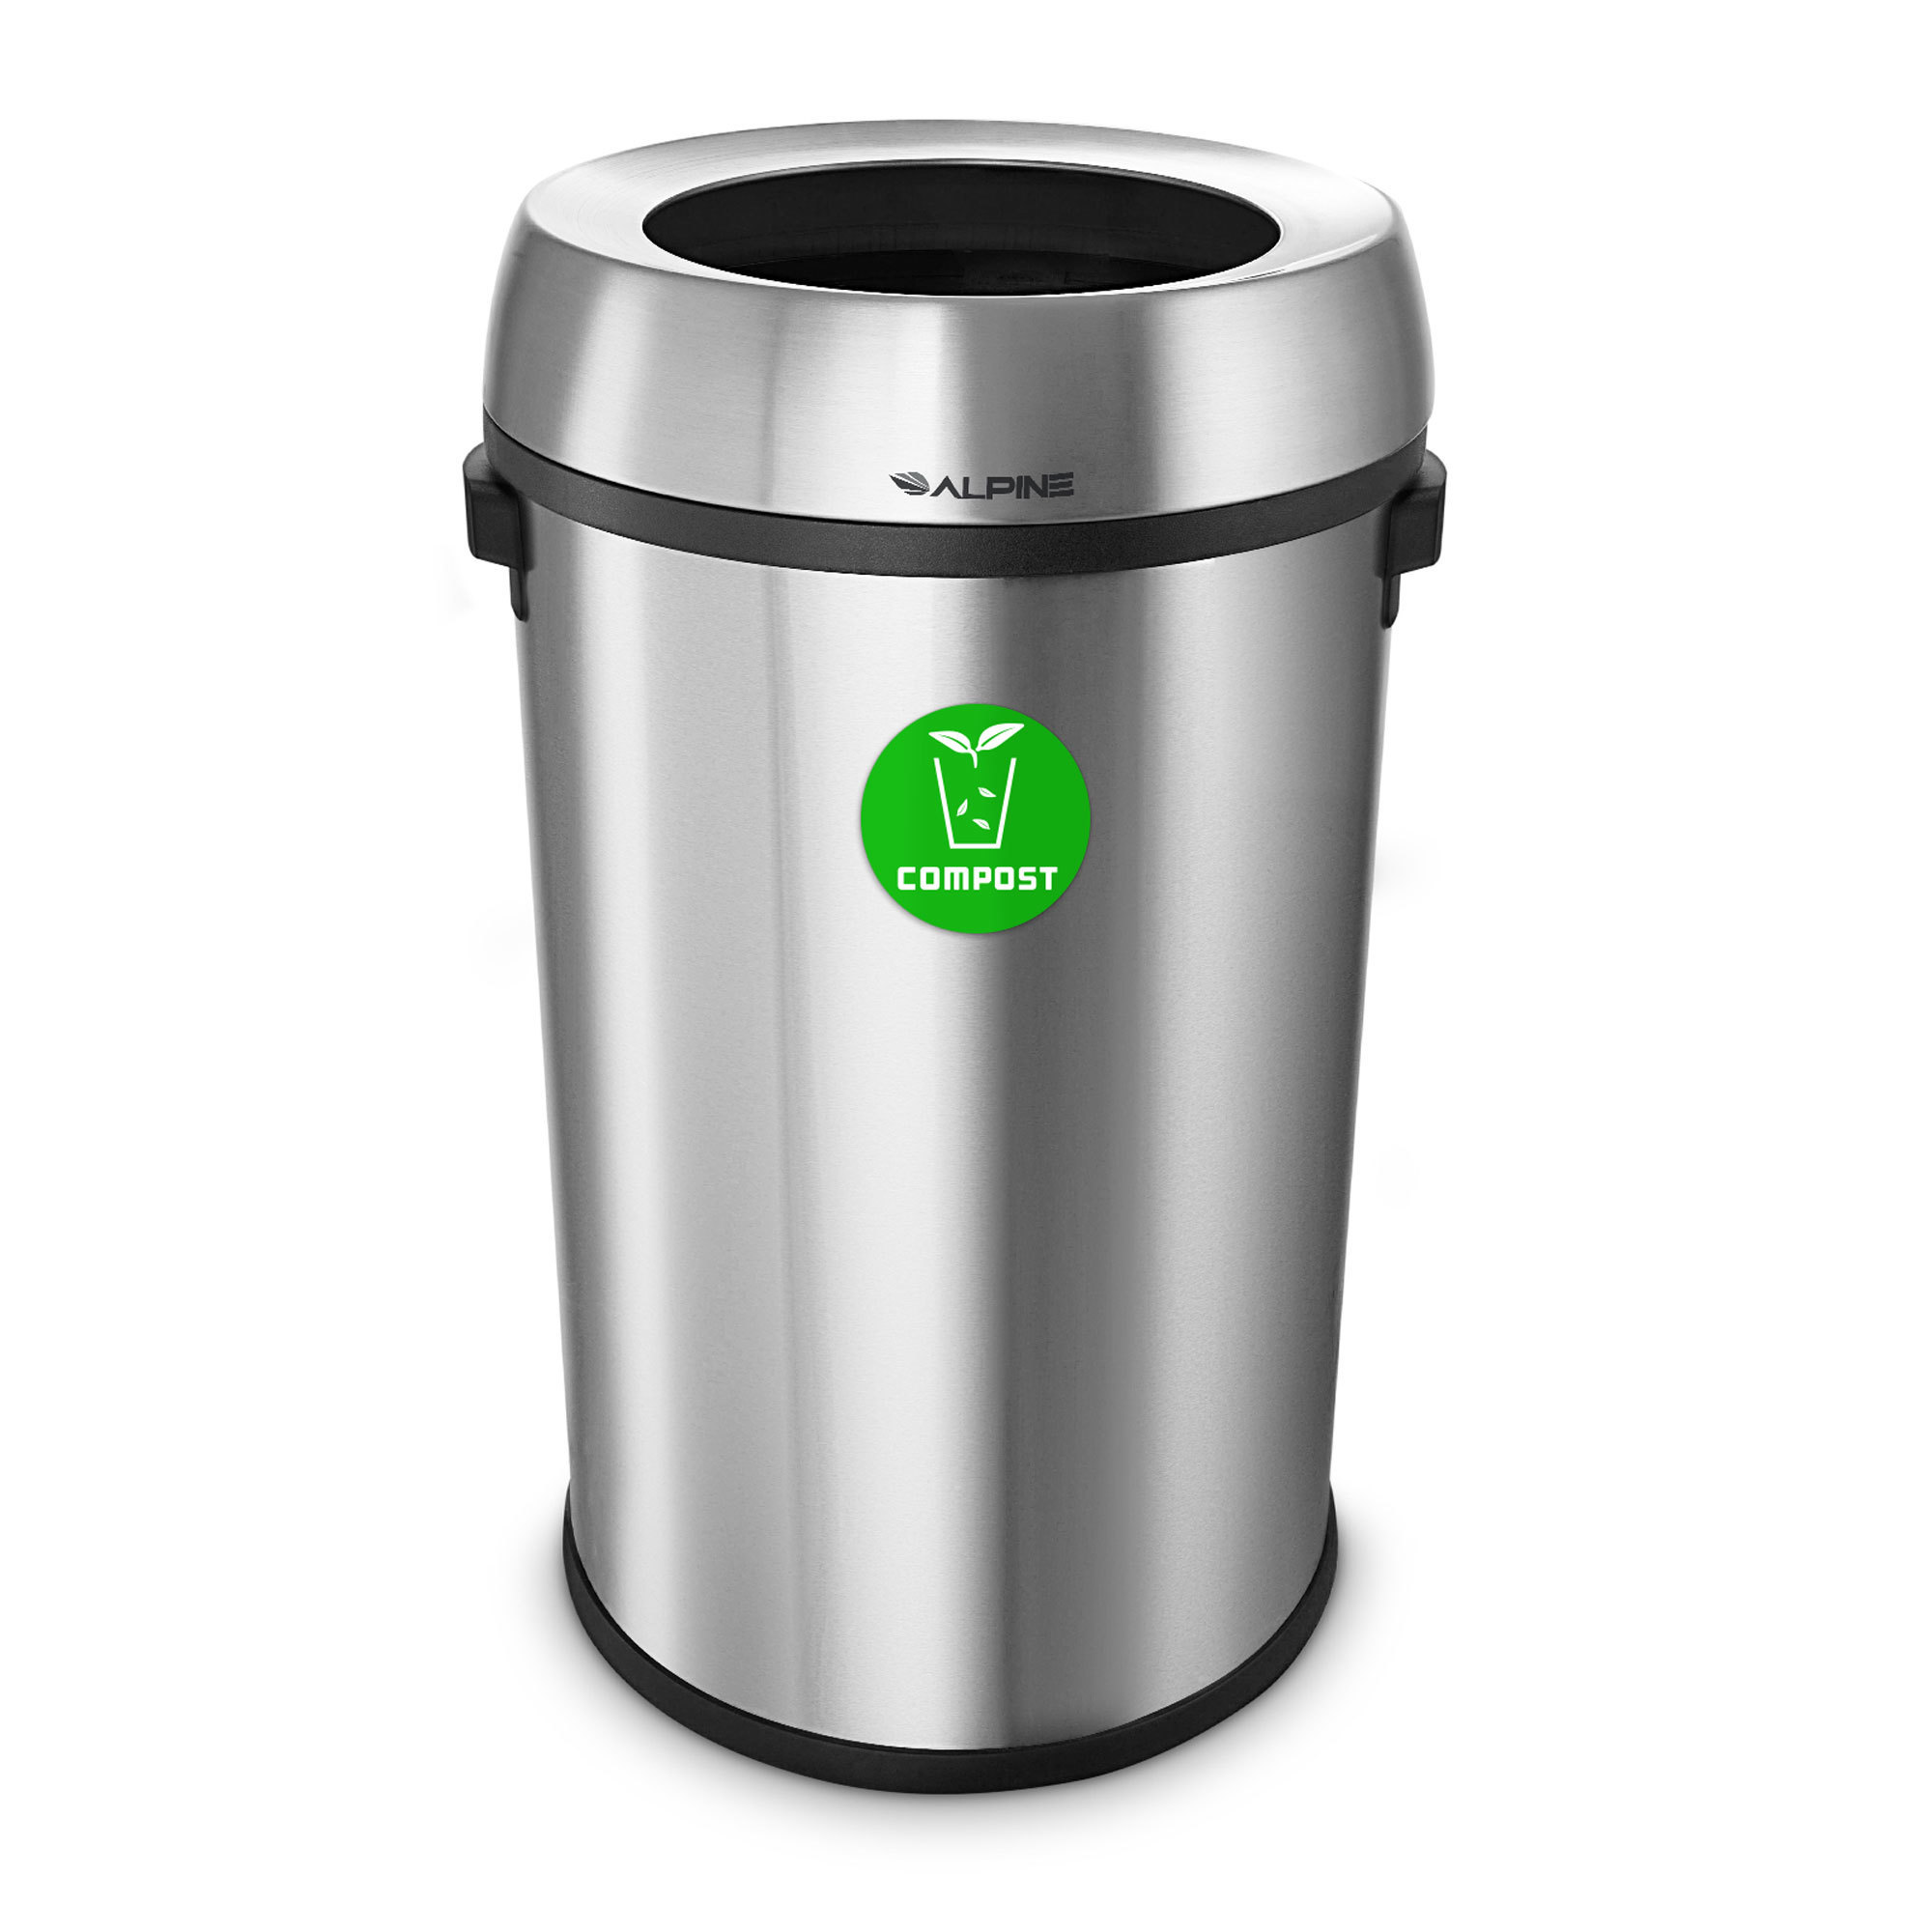 Alpine, 17-Gallon Stainless Steel Compost Trash Can, Capacity 17 Gal, Model ALP470-65L-CO